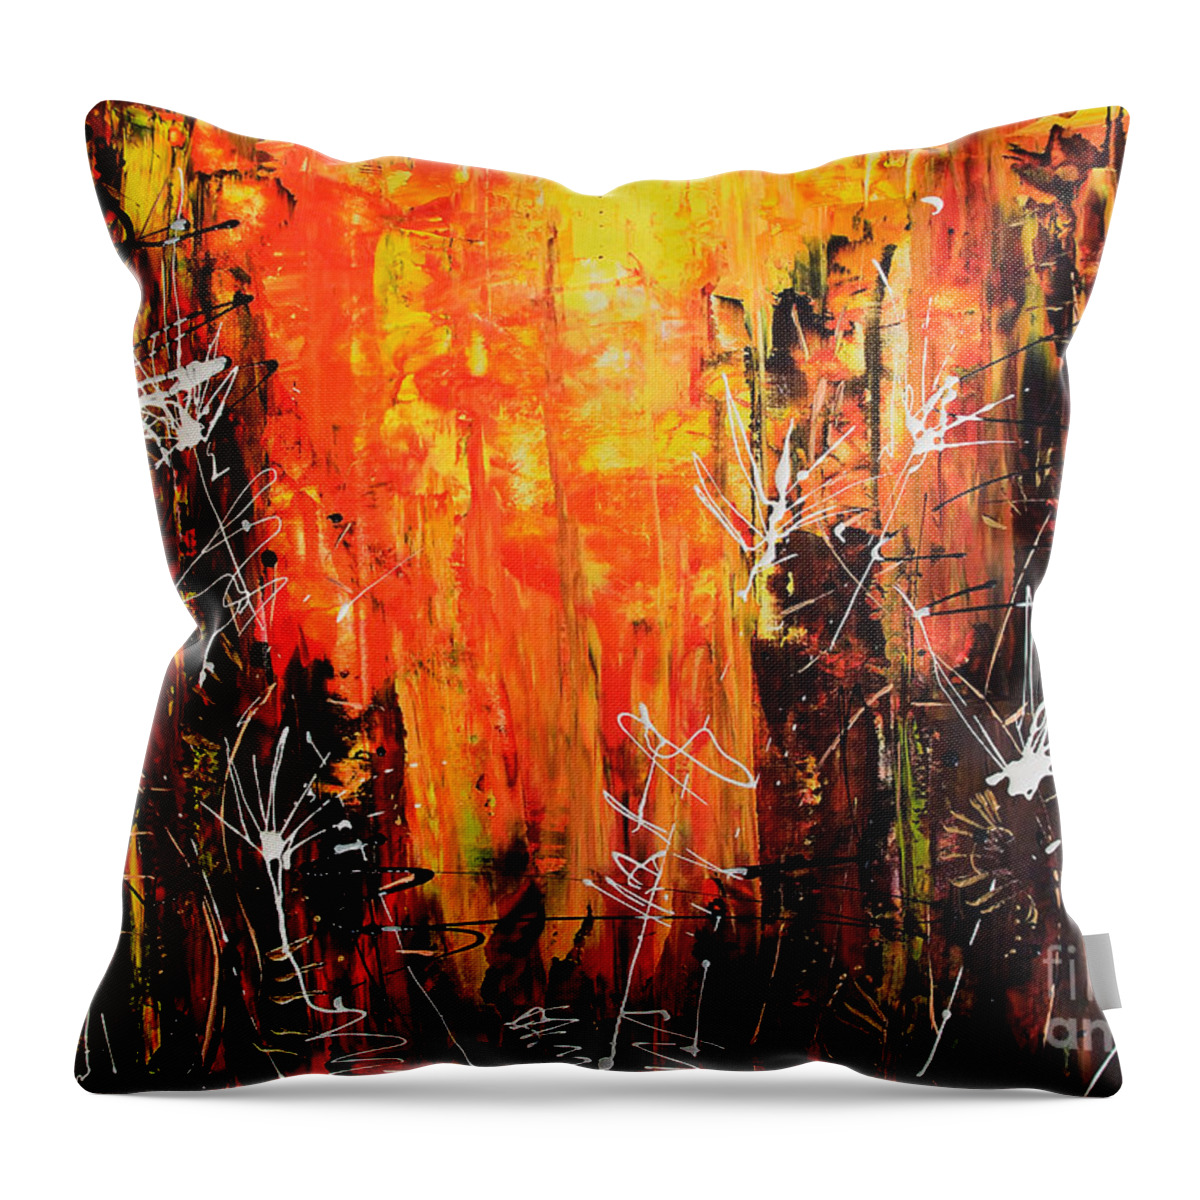 Acrylic Painting Throw Pillow featuring the painting Life by Lidija Ivanek - SiLa